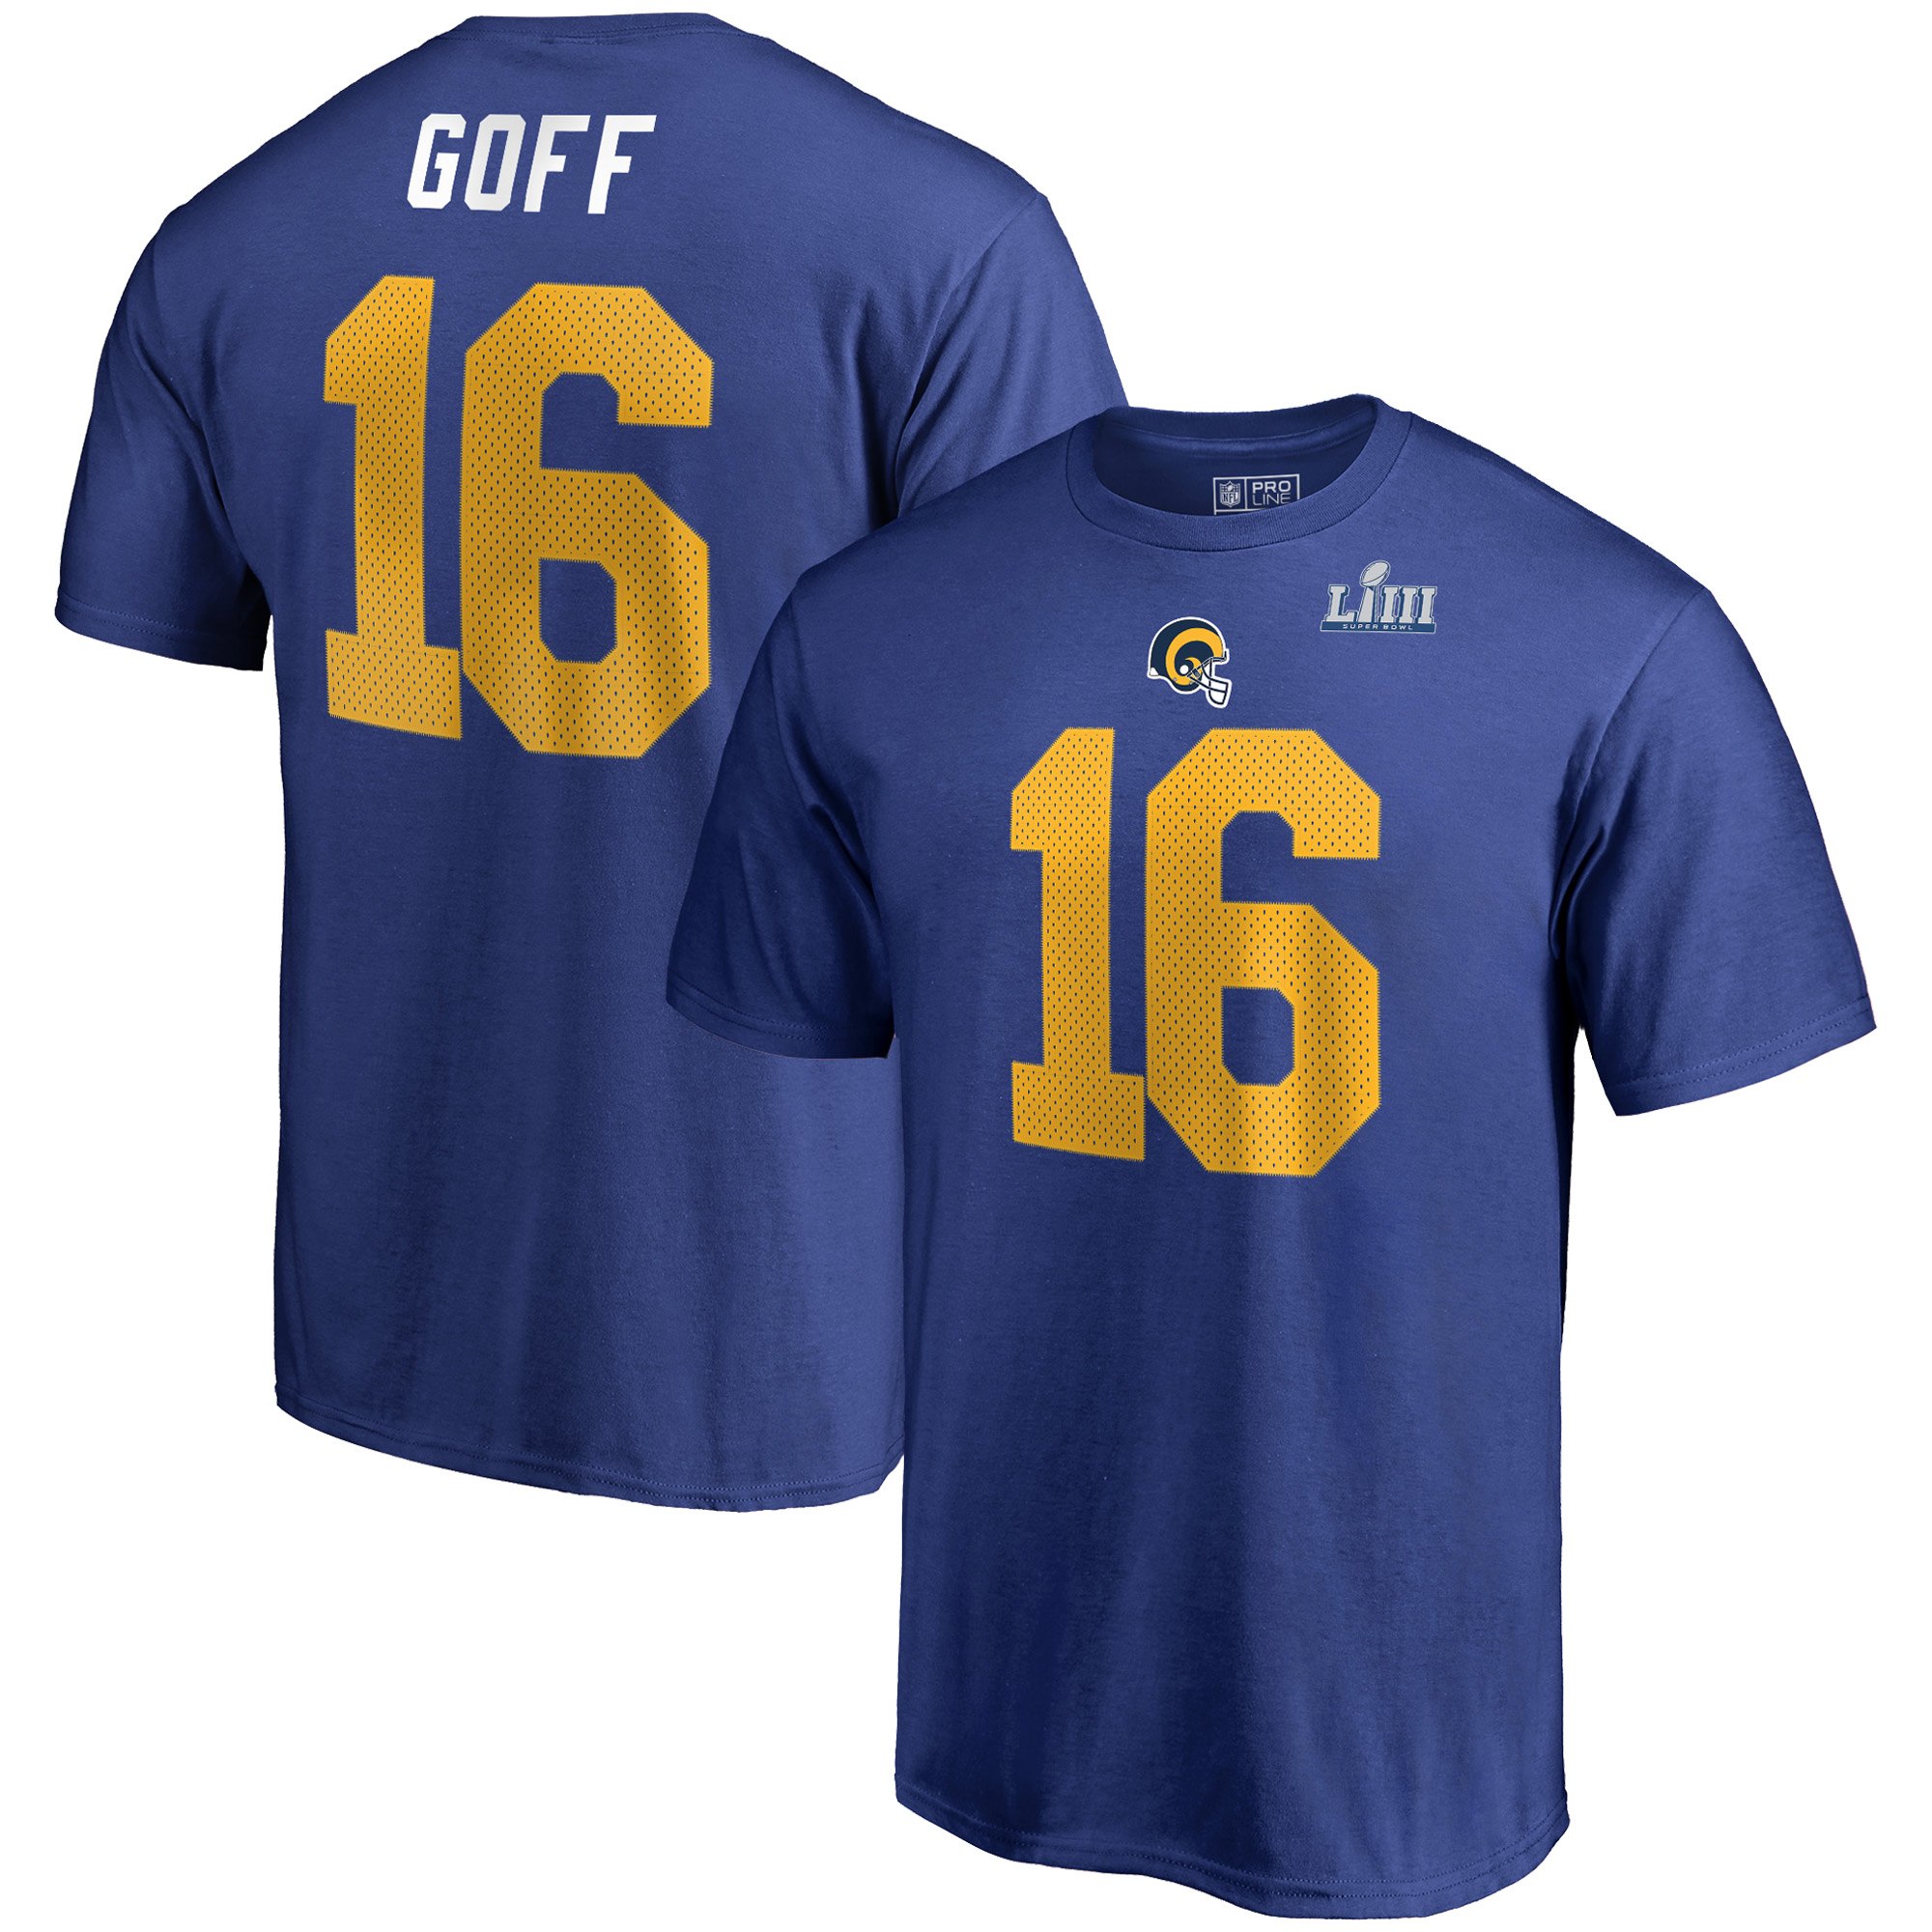 Los Angeles Rams 16 Jared Goff NFL Pro Line by Fanatics Branded Super Bowl LIII Bound Eligible Receiver Name & Number T-Shirt Royal